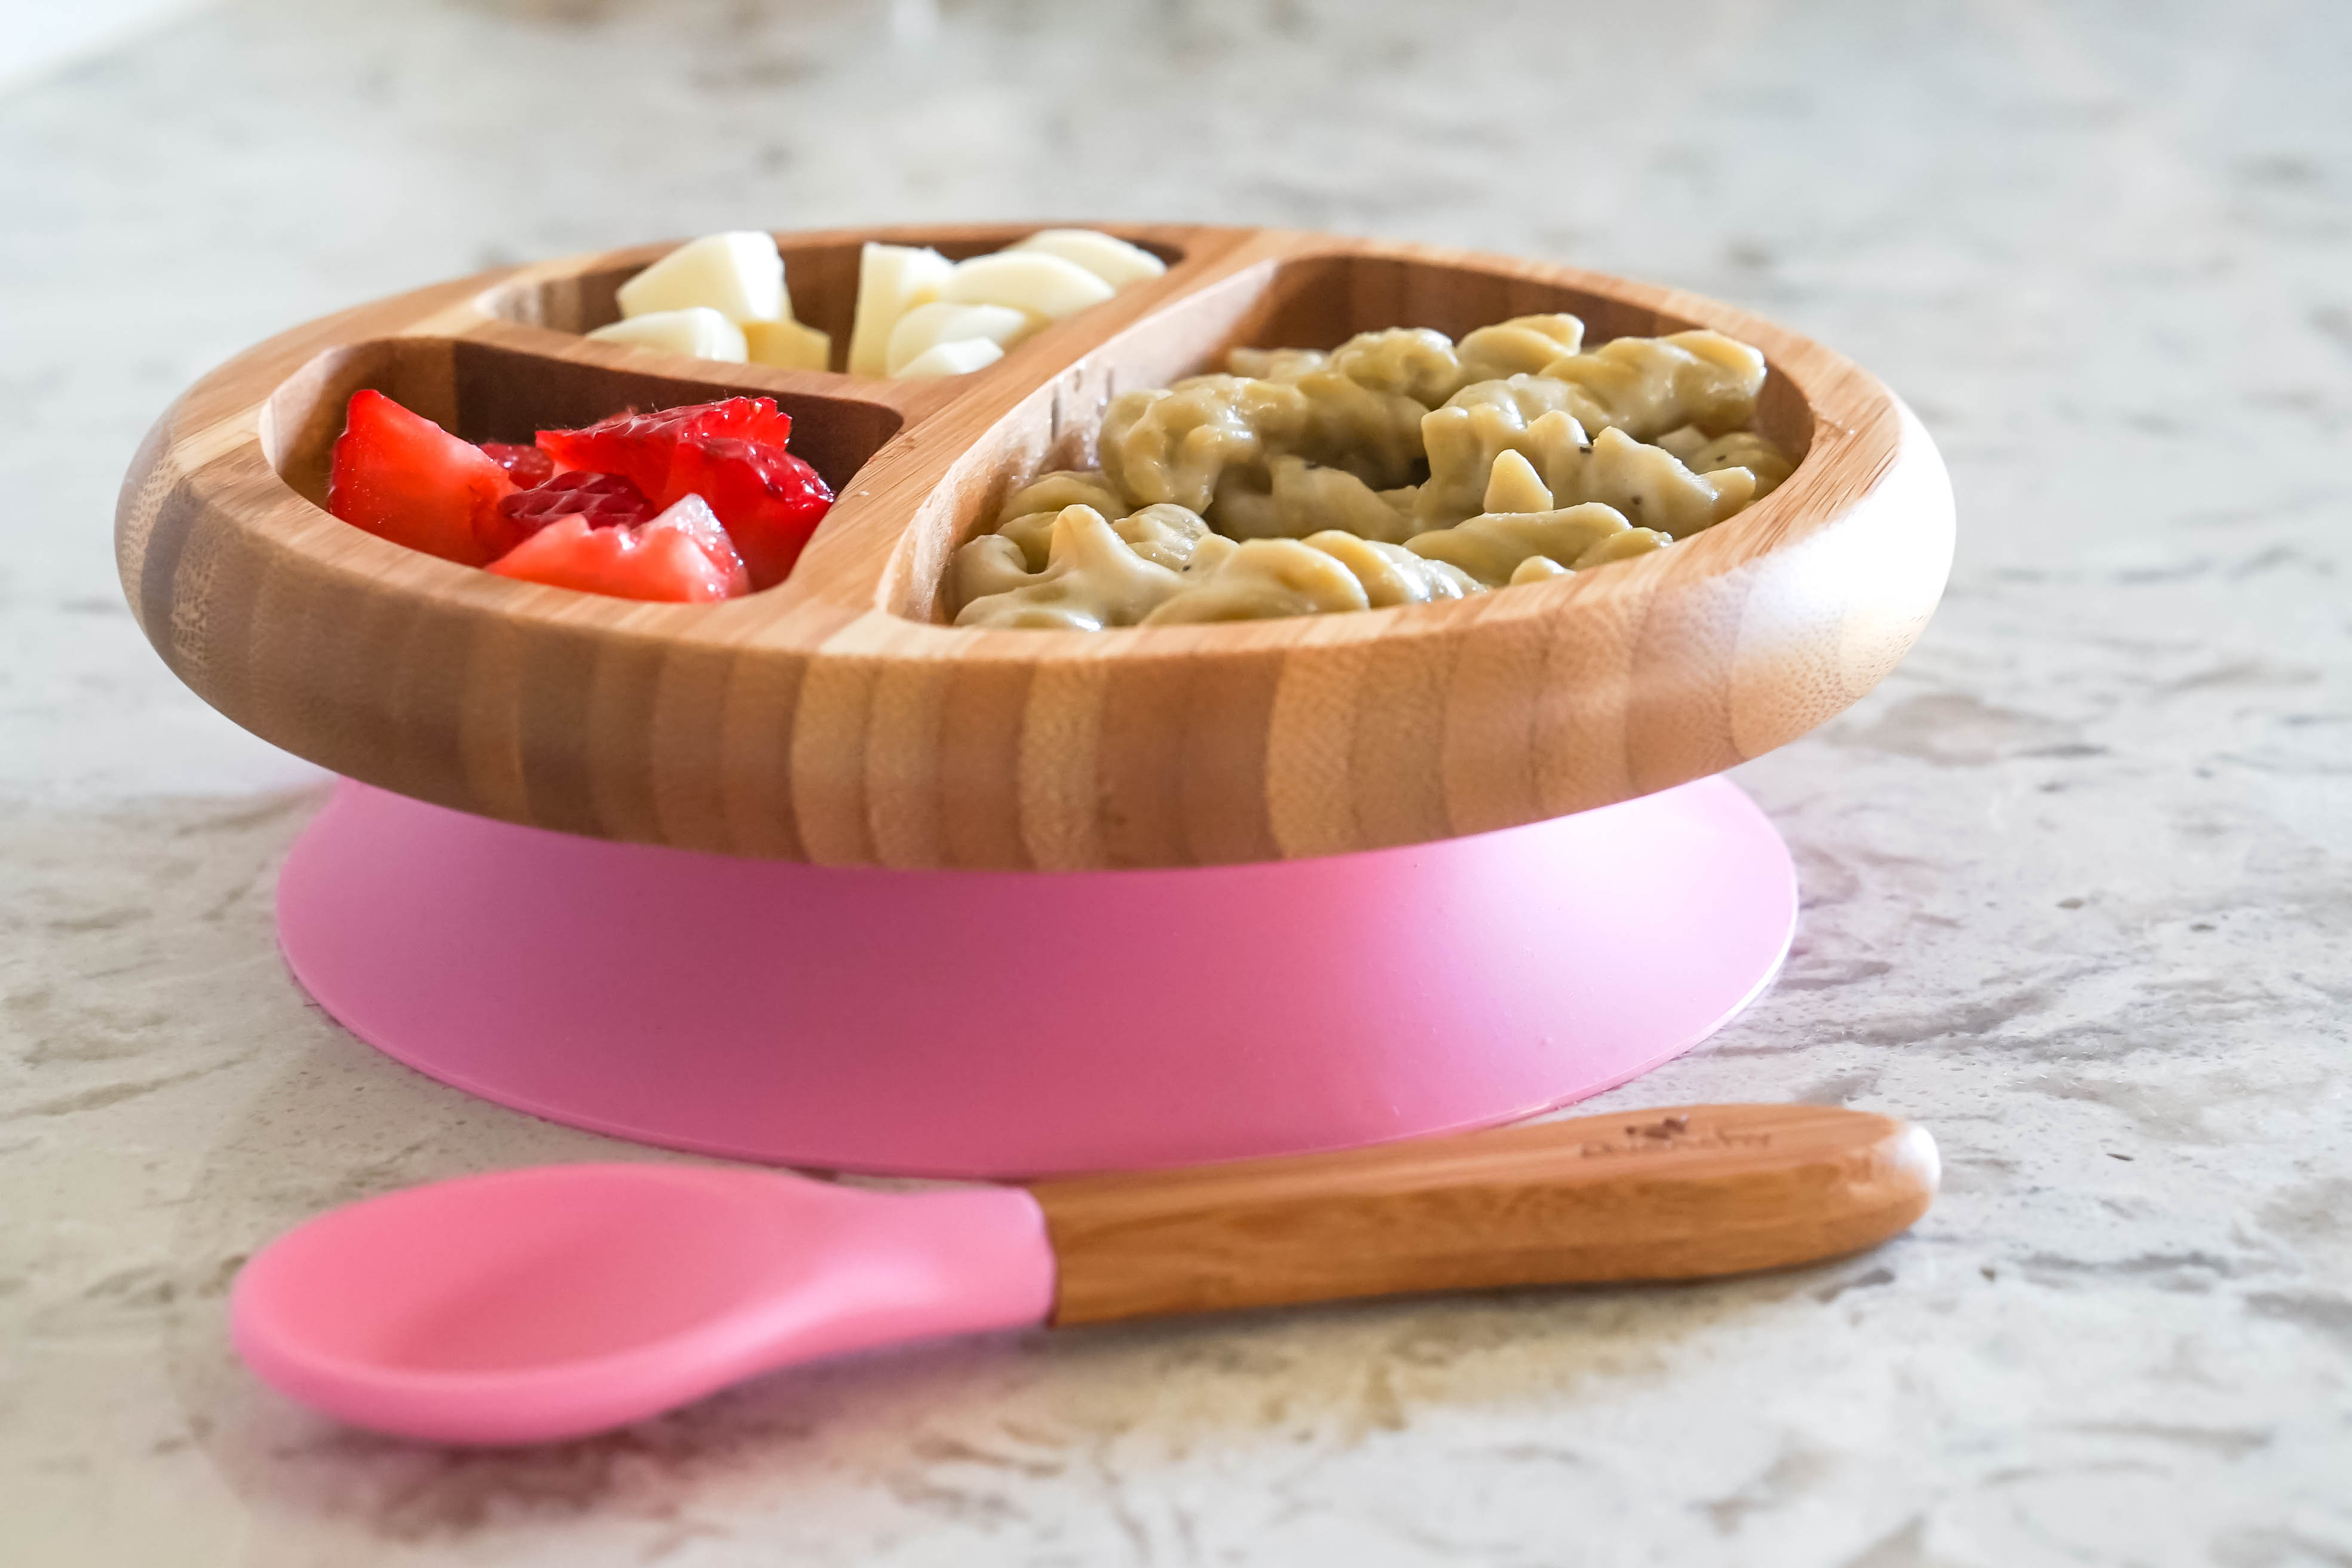 Avanchy Bamboo Suction Classic Plate and Spoon, Pink